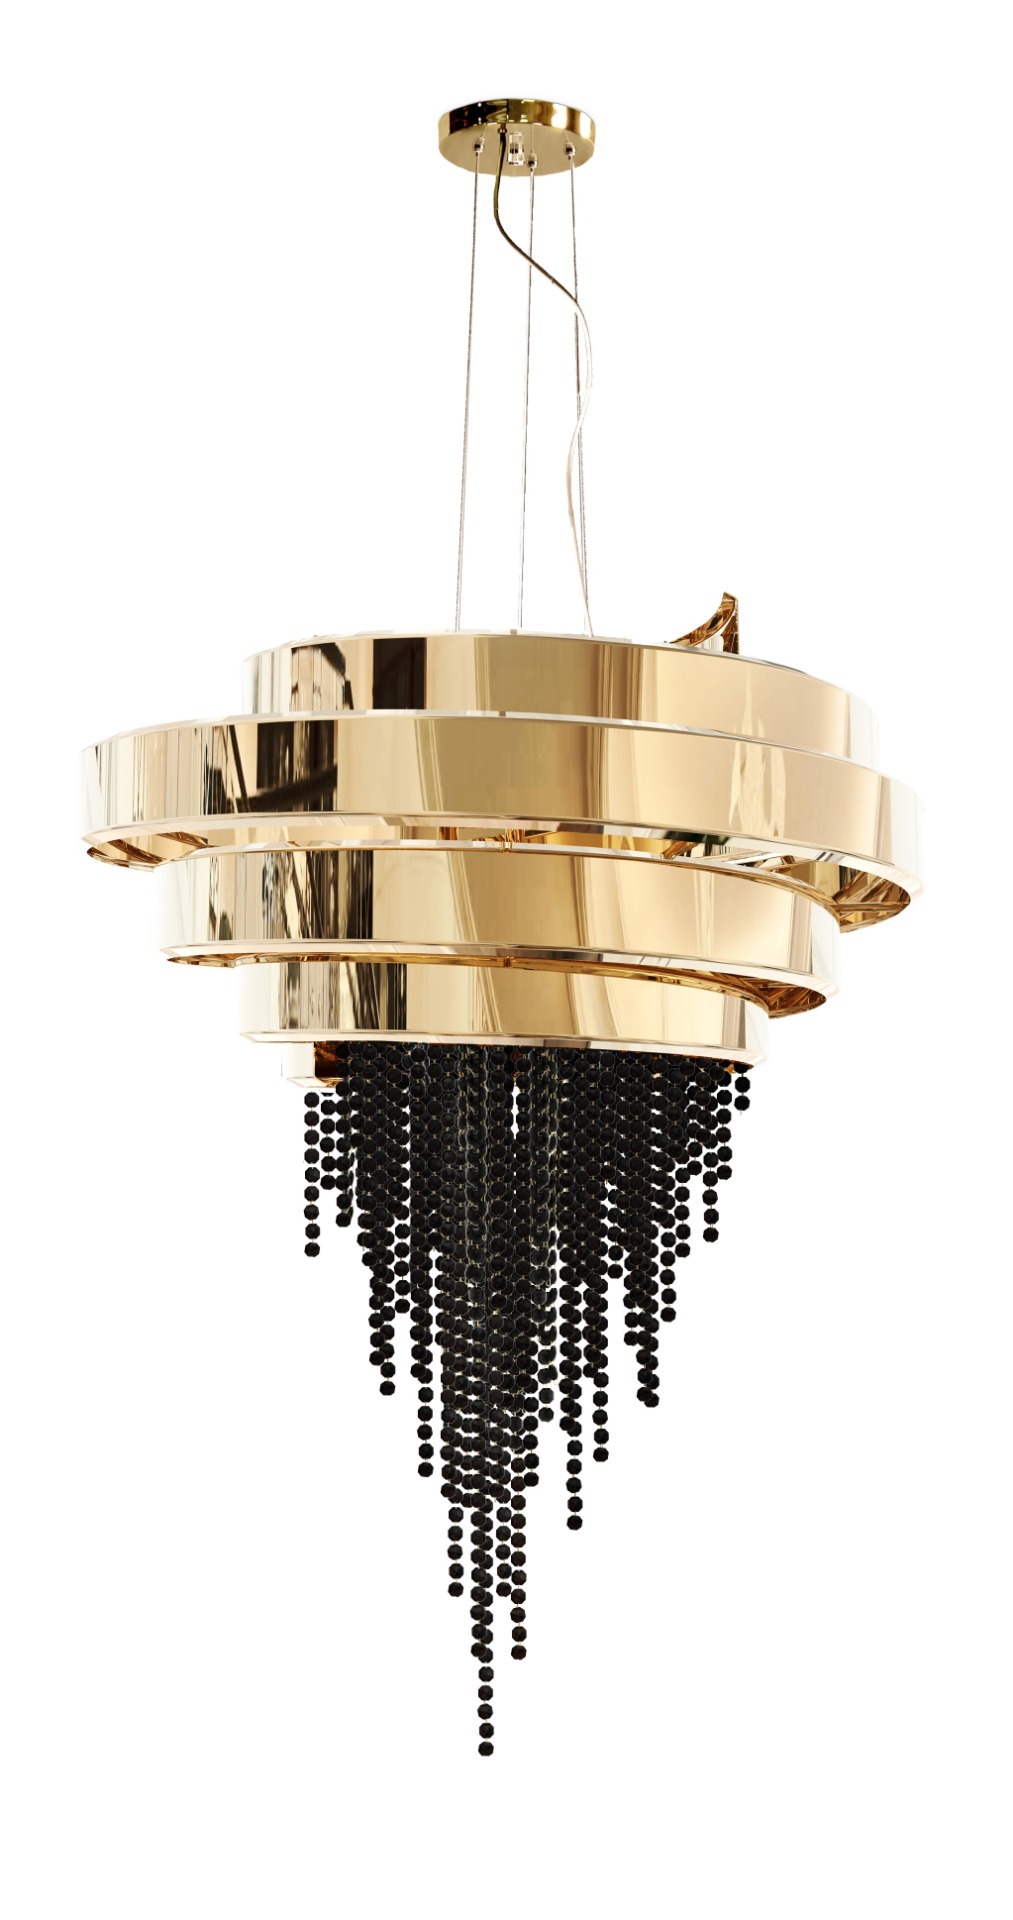 Product of the week: the guggenheim chandelier